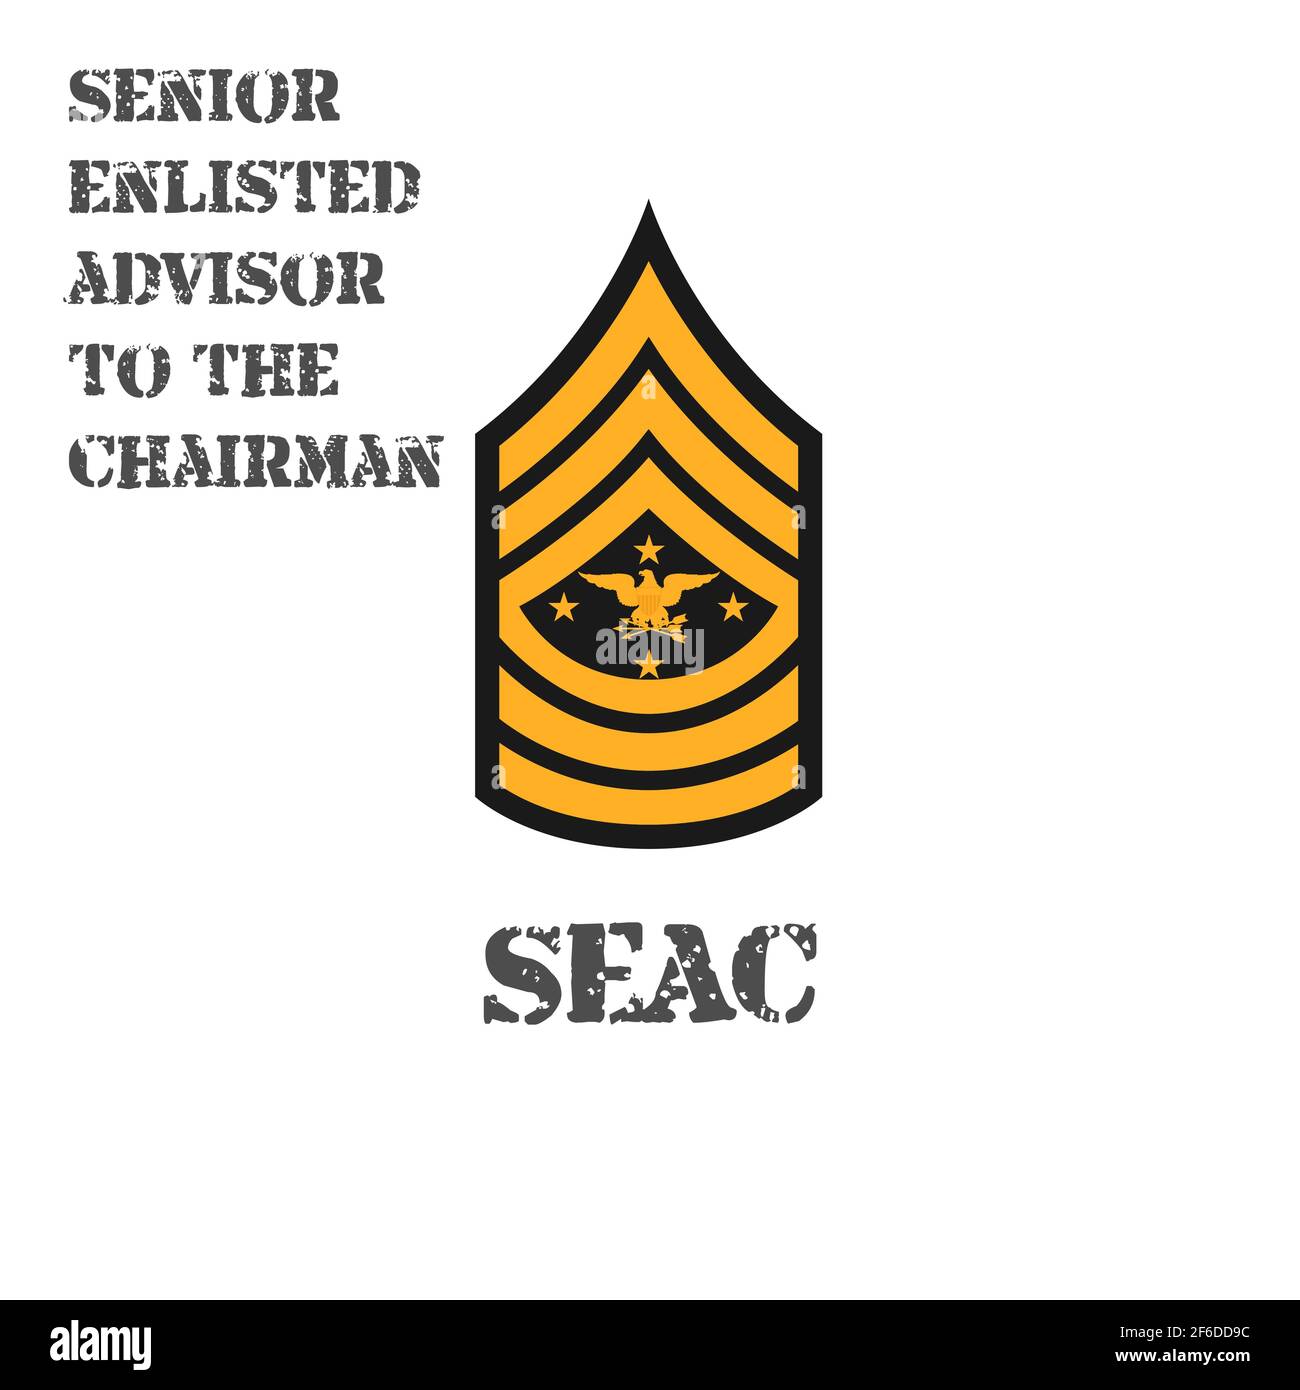 Realistic vector icon of the chevron senior enlisted advisor to the chairman of the US Army. Description and abbreviated name. Stock Vector